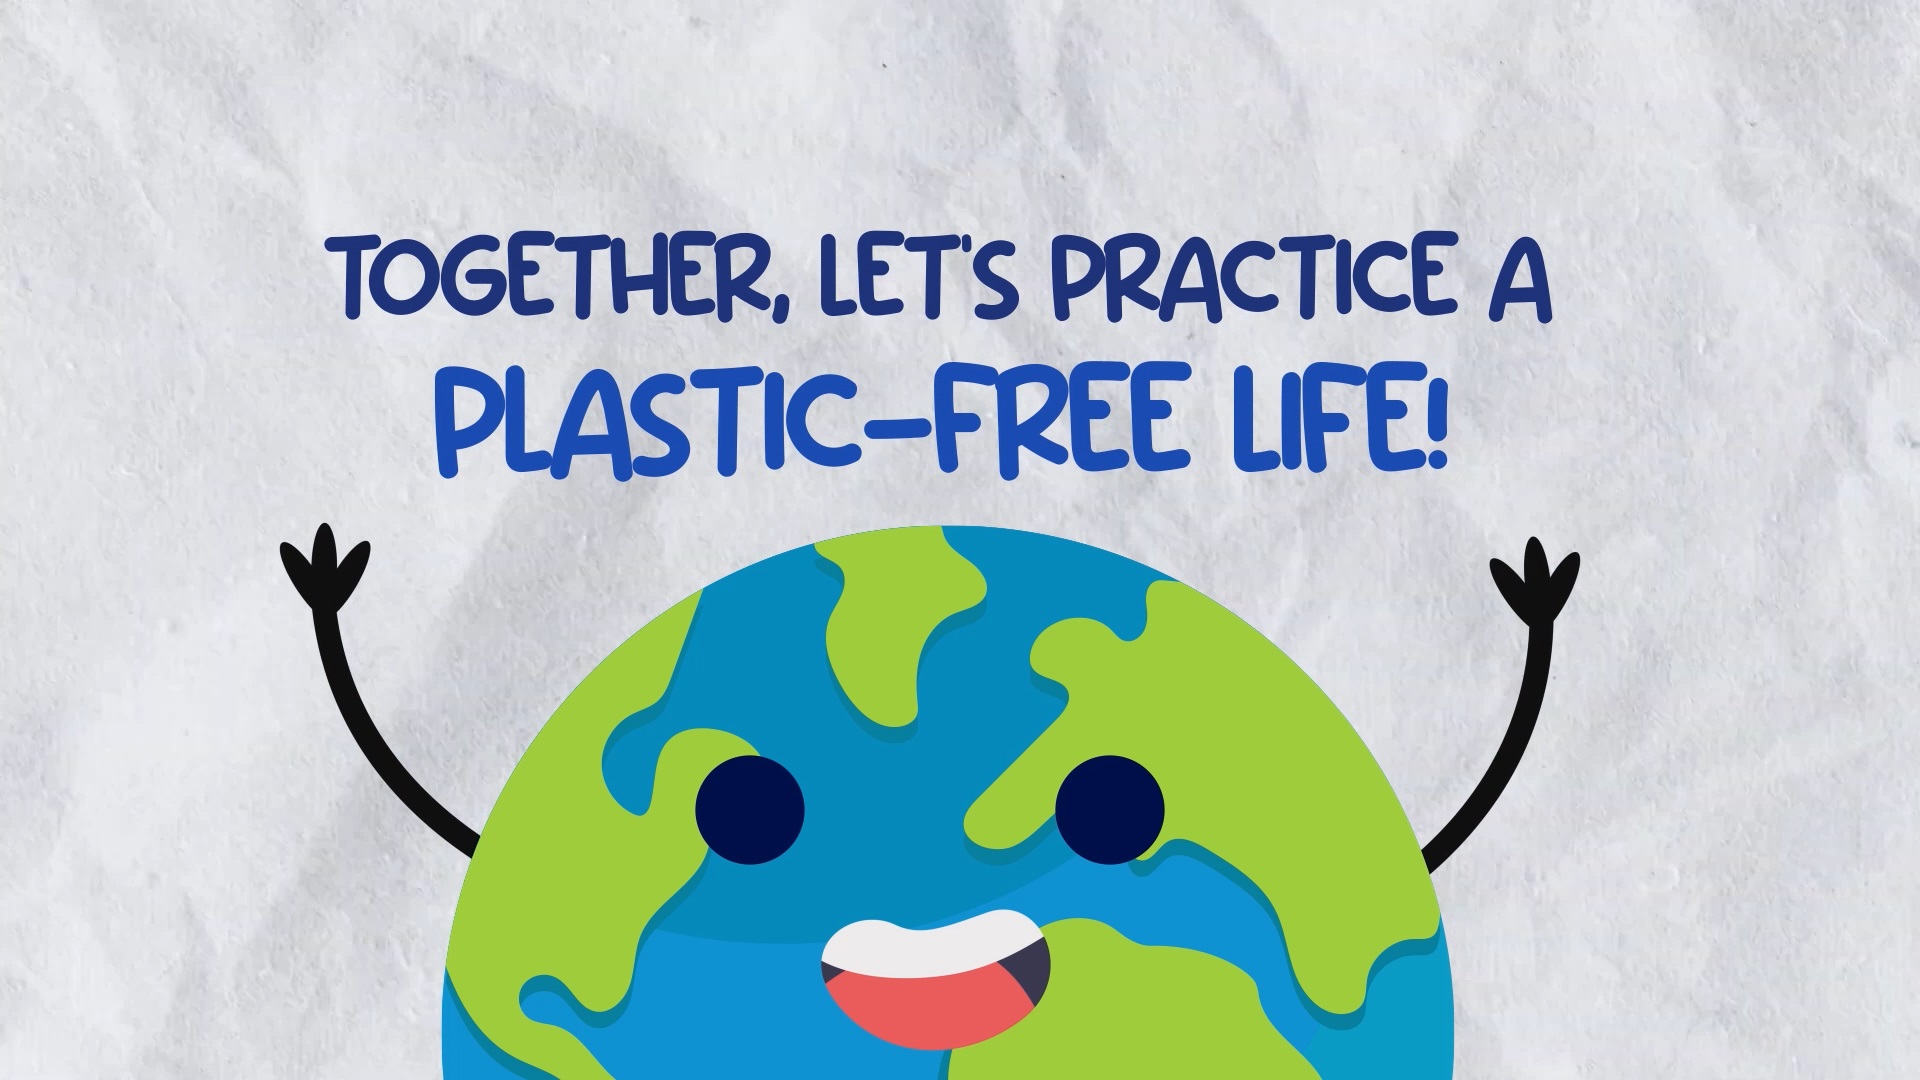 Let's practice a plastic-free life!